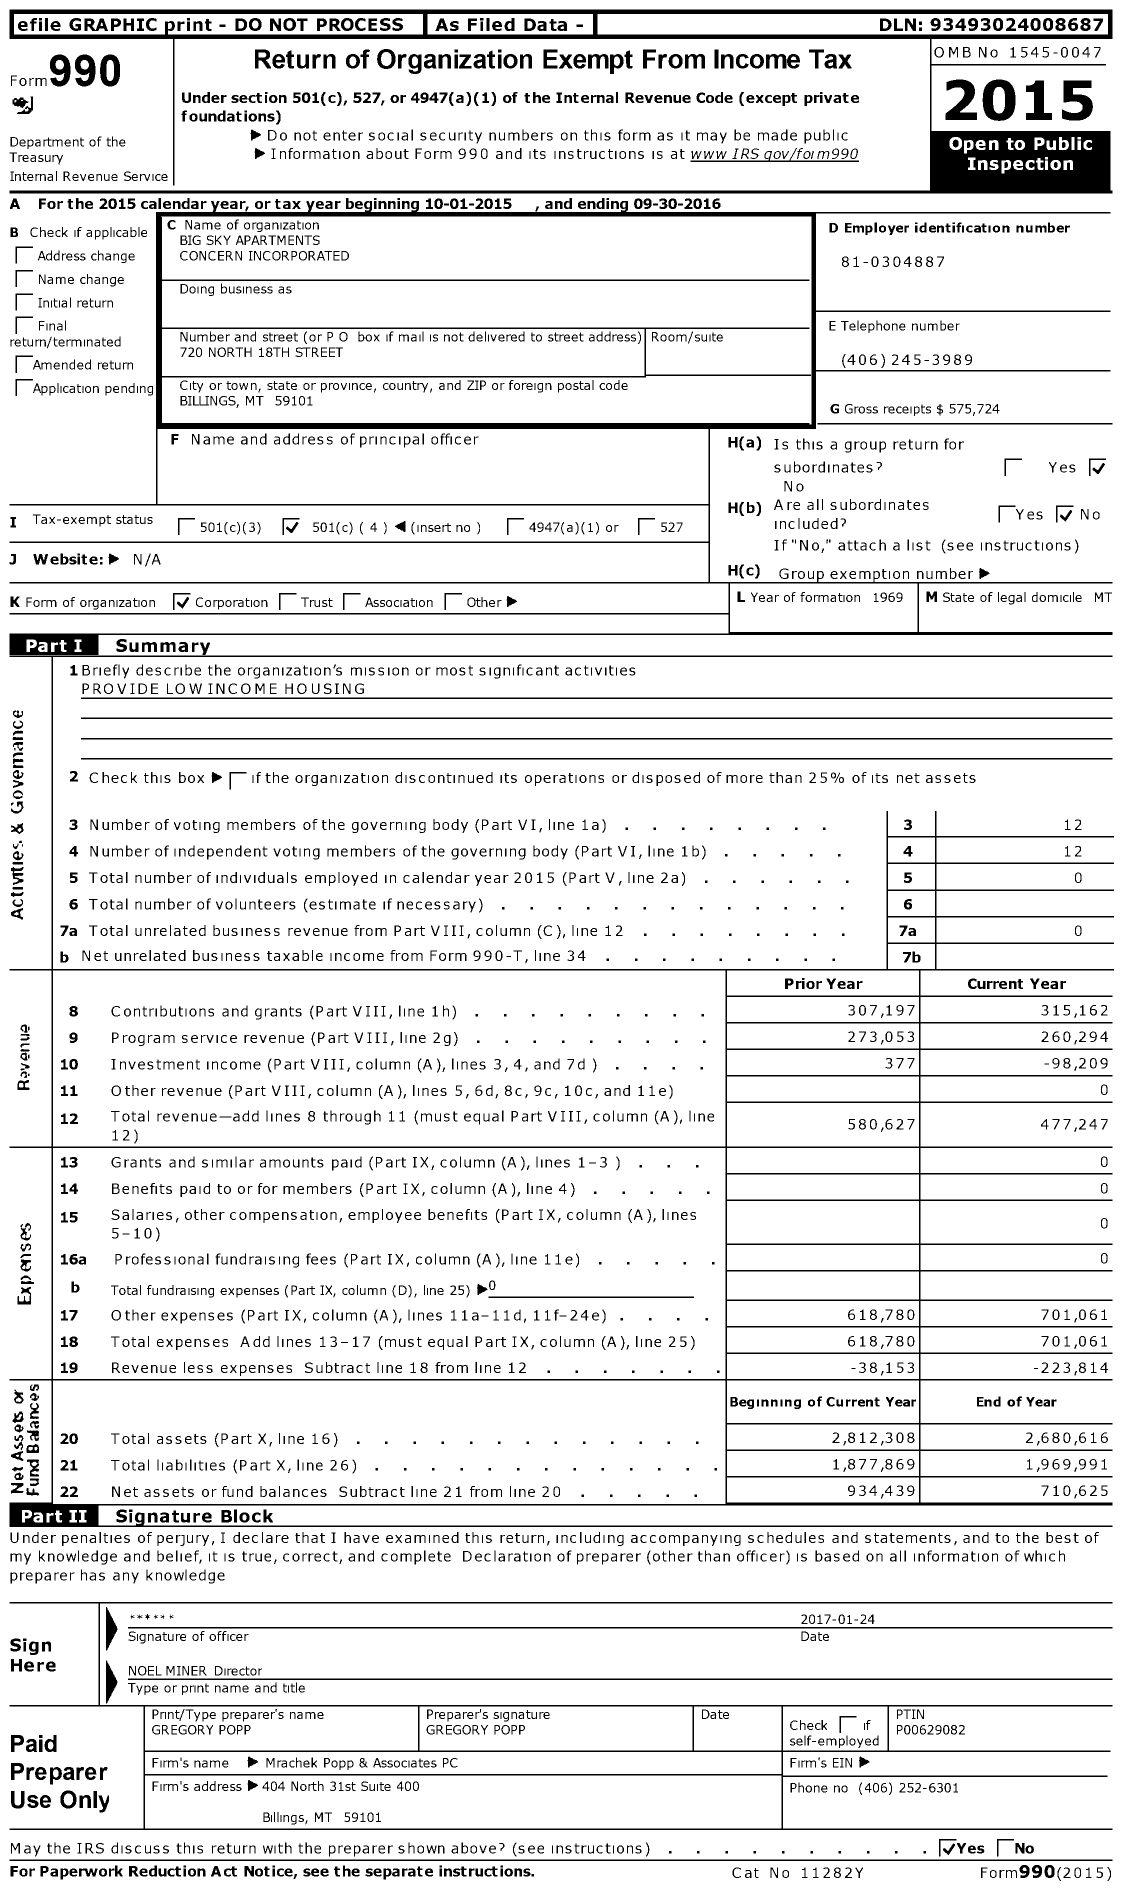 Image of first page of 2015 Form 990O for Big Sky Apartments Concern Incorporated